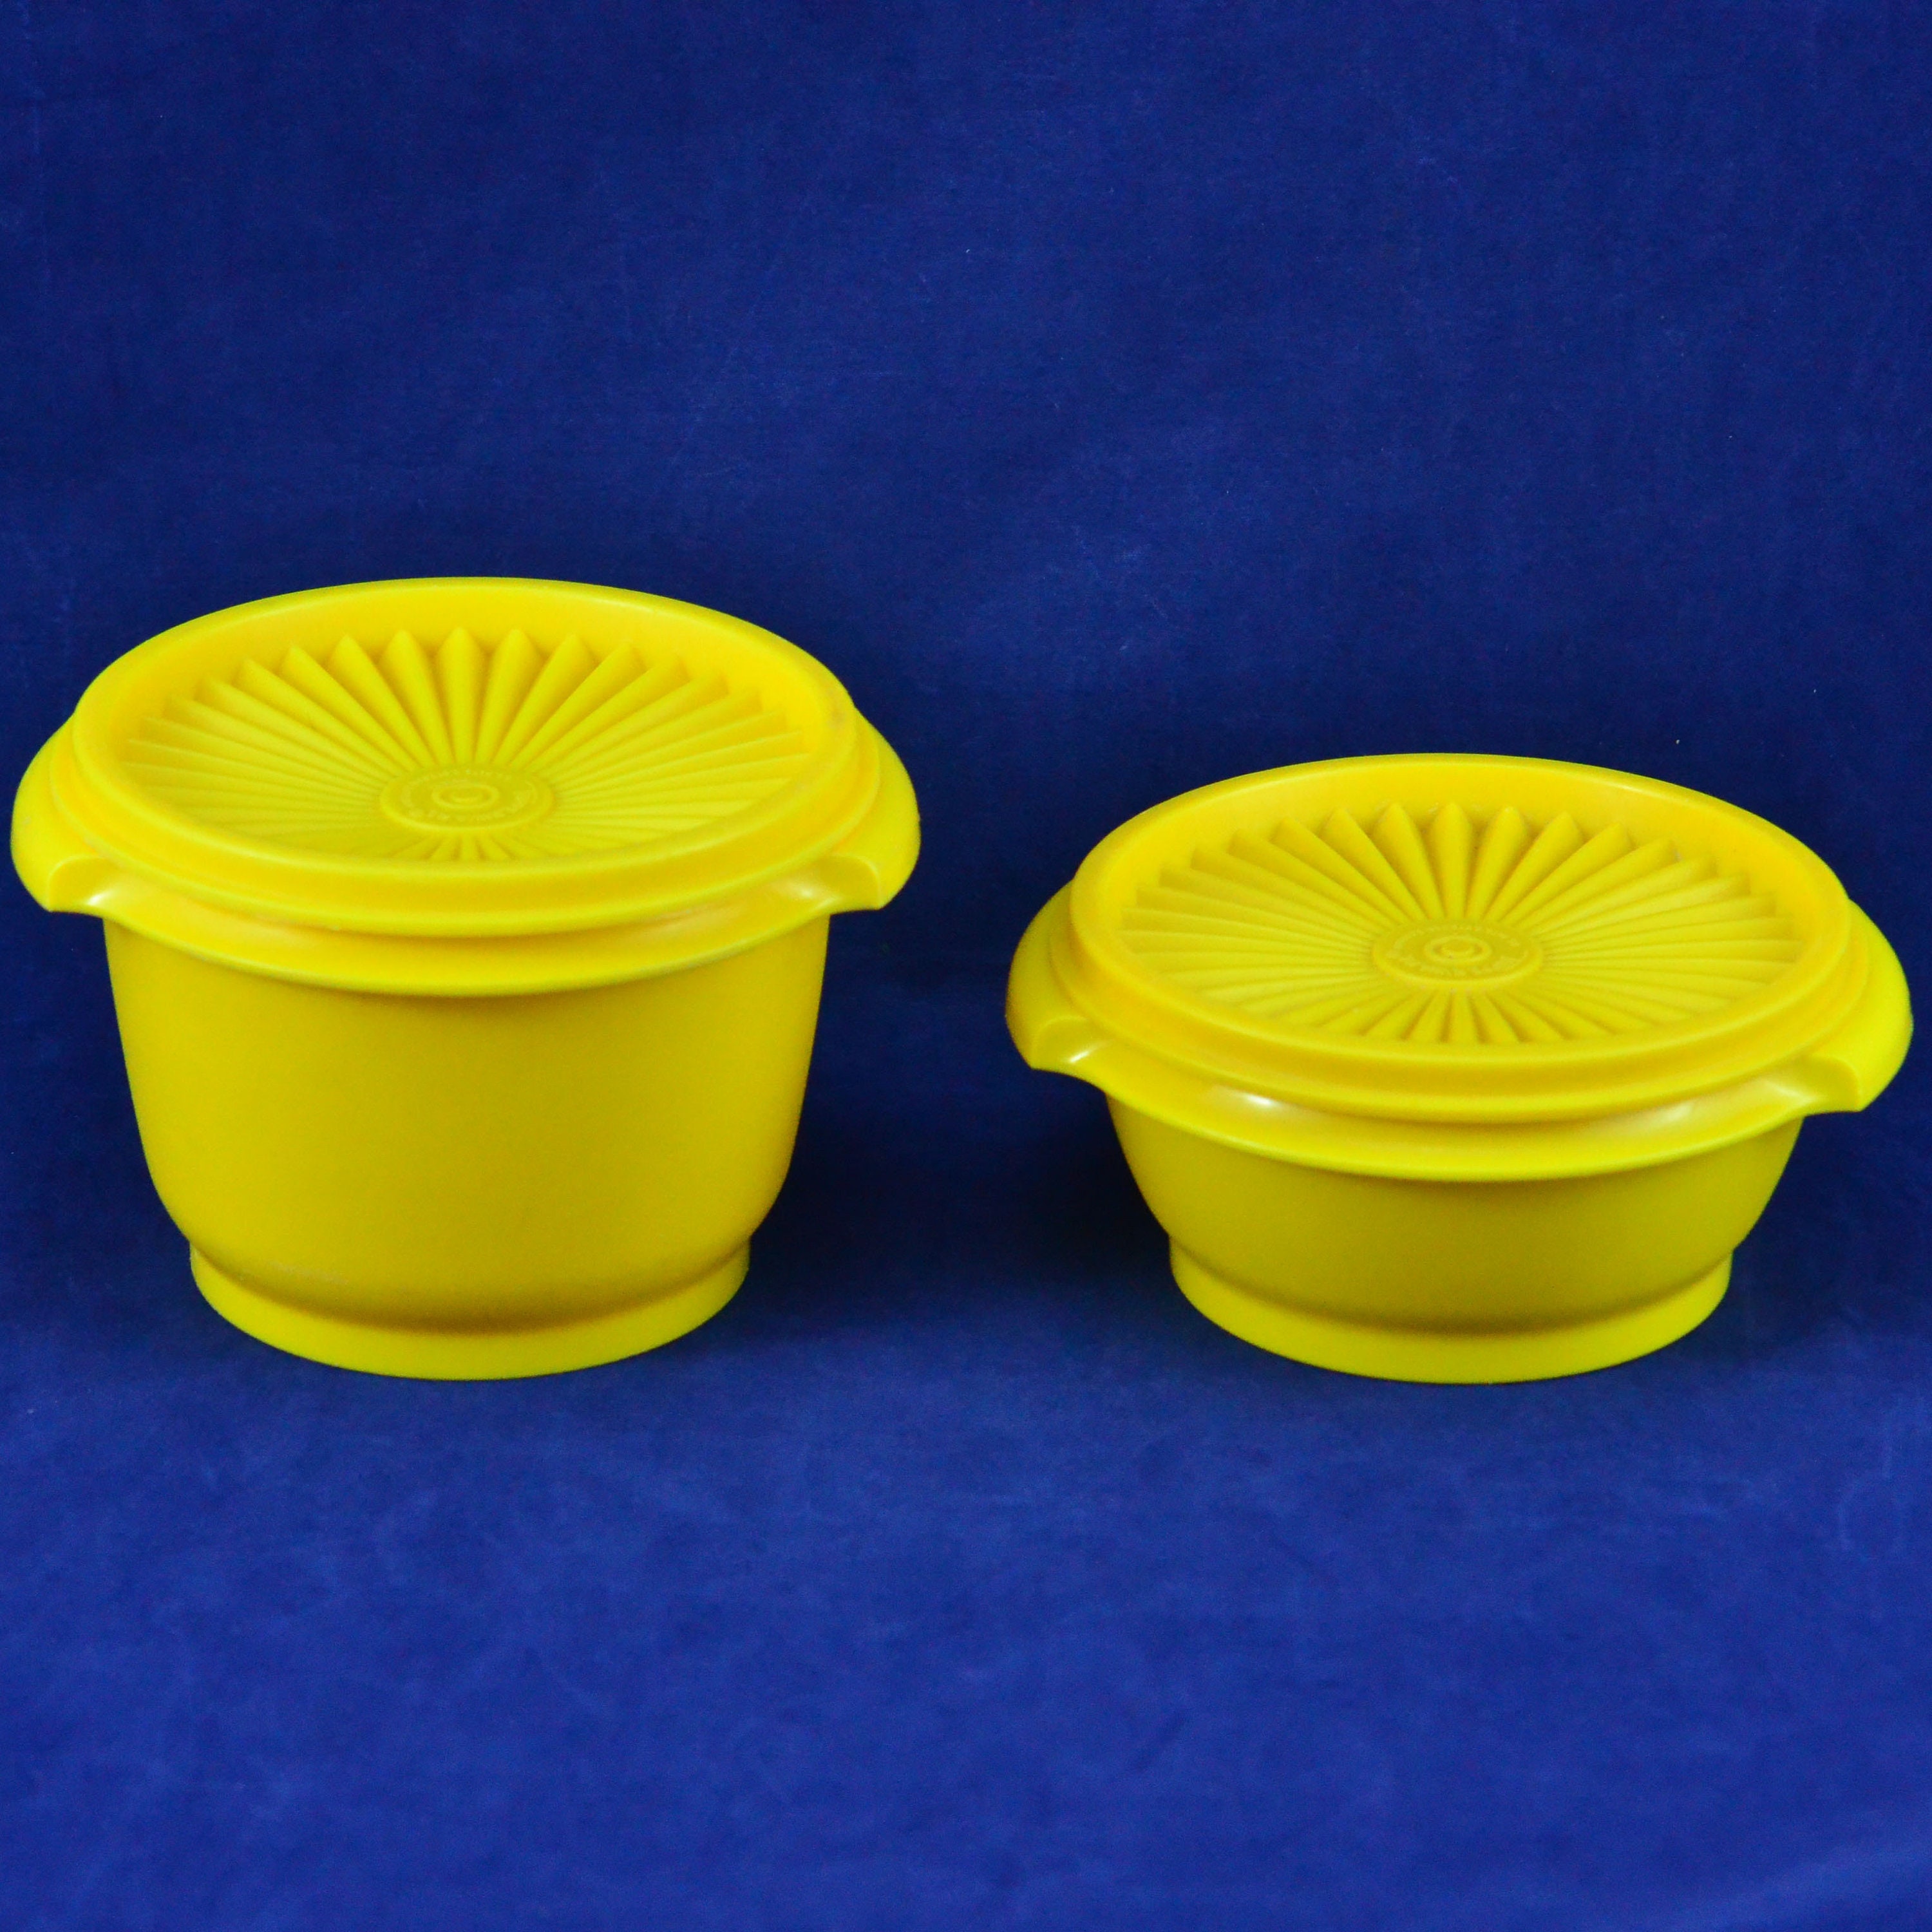 Tupperware: How a plastic bowl with a 'burping seal' gave women a means to  an income